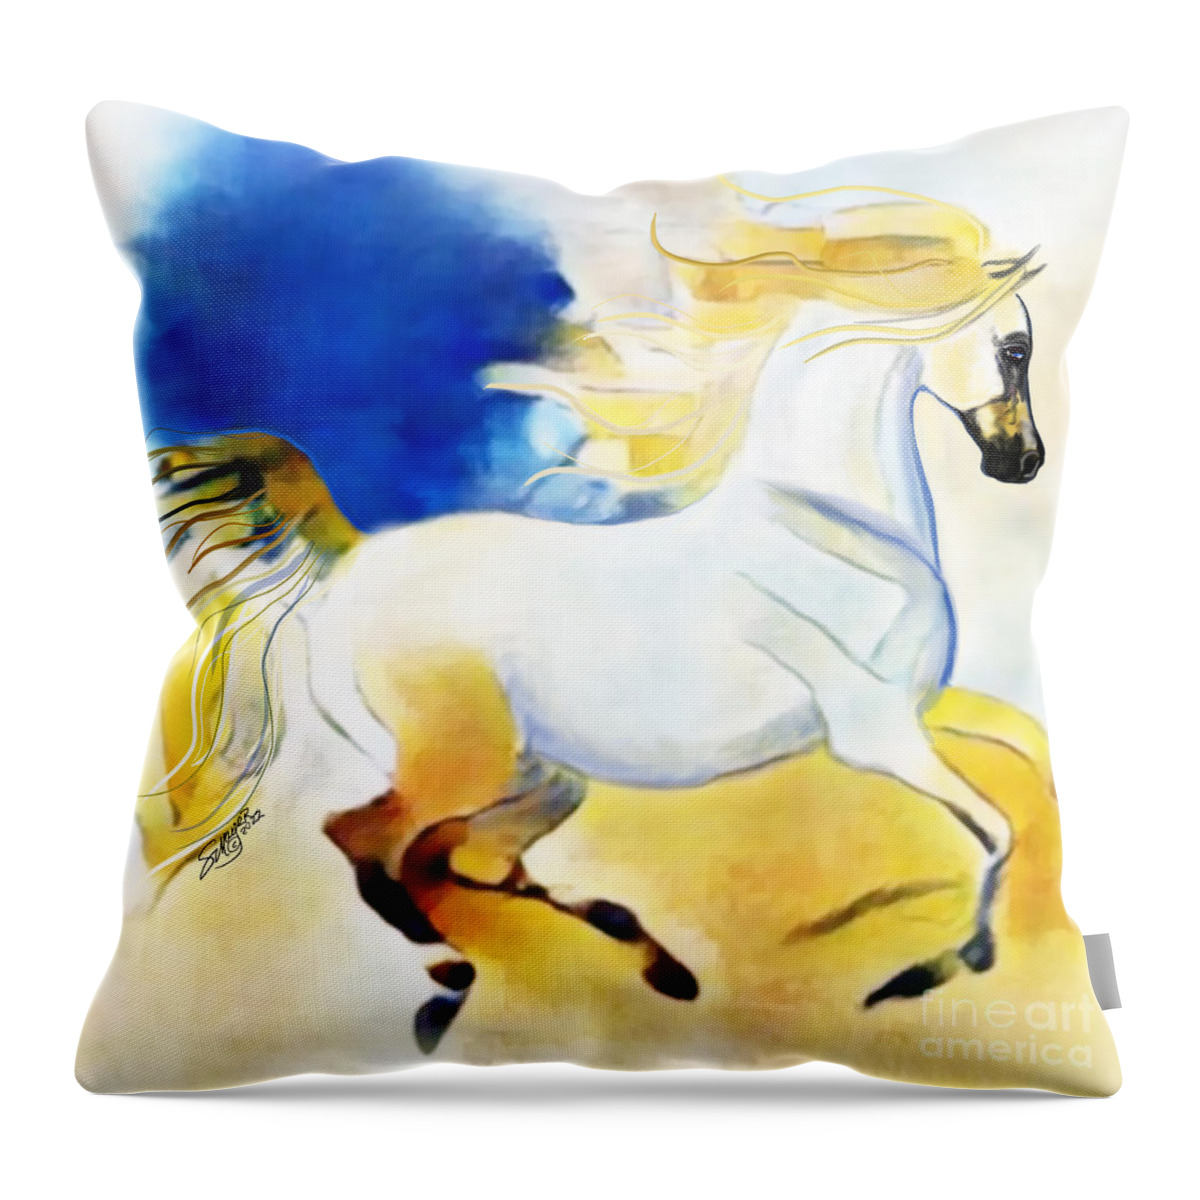 Equestrian Art Throw Pillow featuring the digital art NFT Cantering Horse 008 by Stacey Mayer by Stacey Mayer